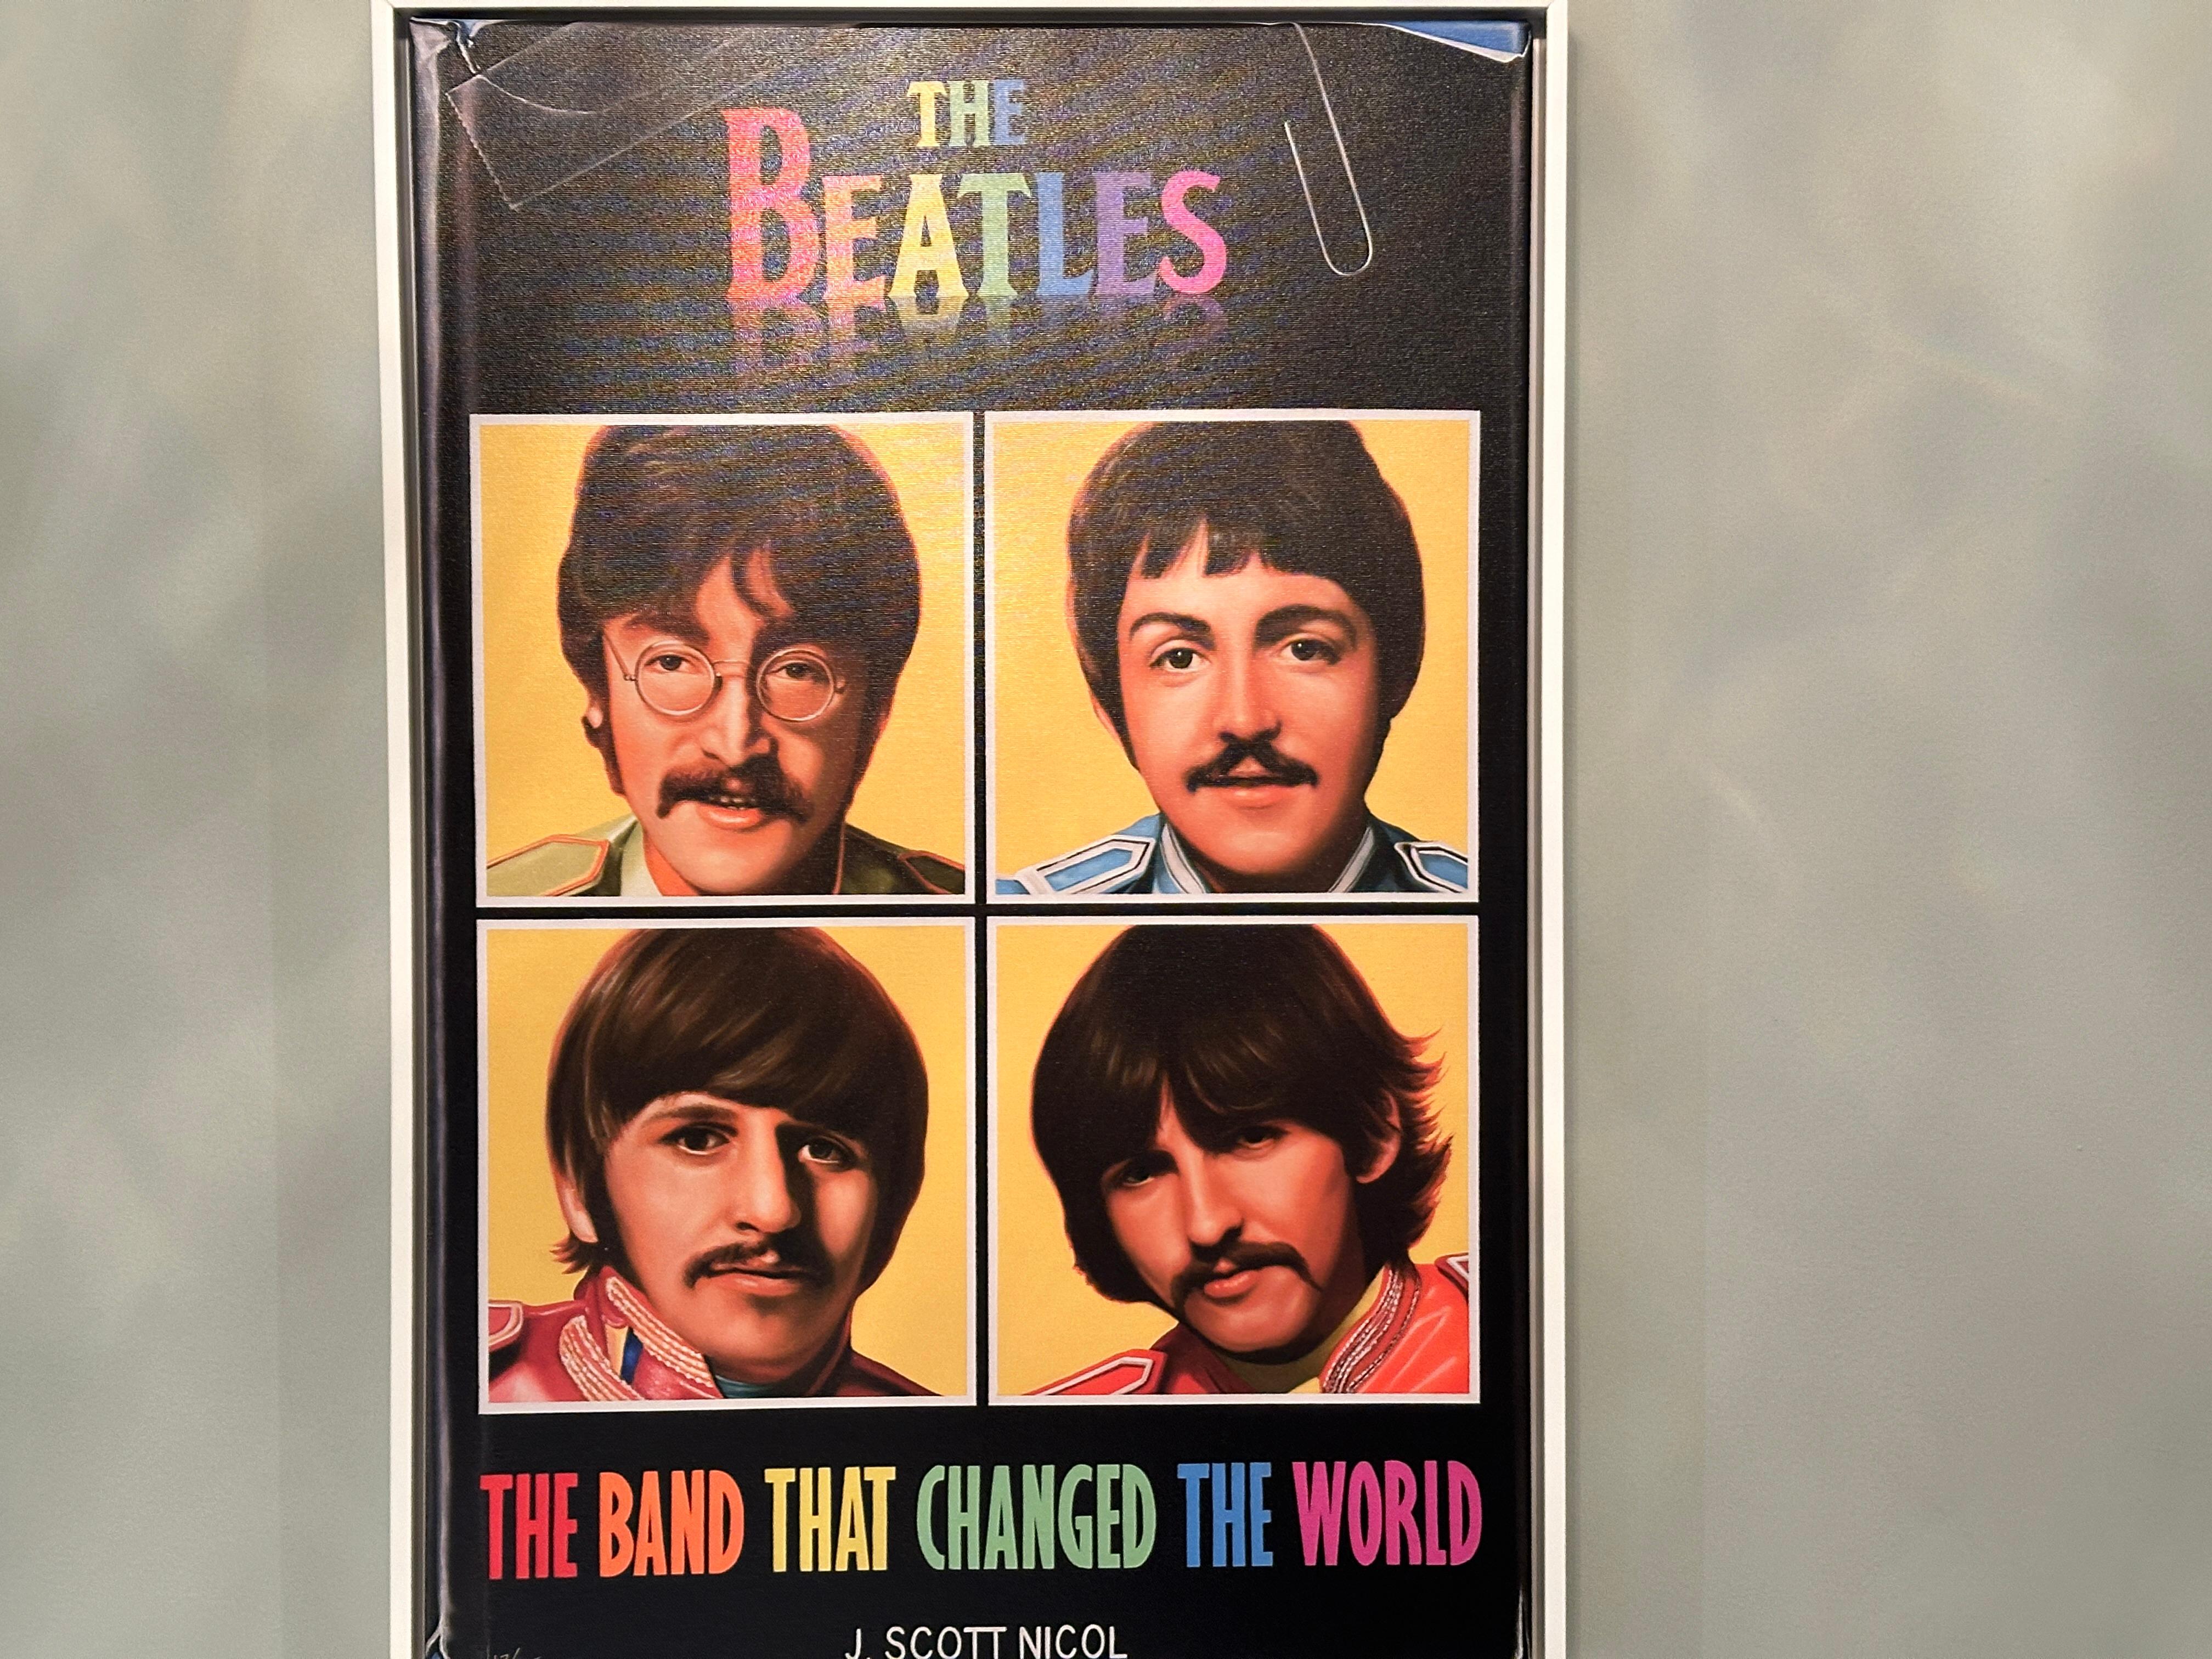 The Beatles Licensed Artwork by J. Scott Nicol Ltd Ed Signed and Numbered For Sale 3